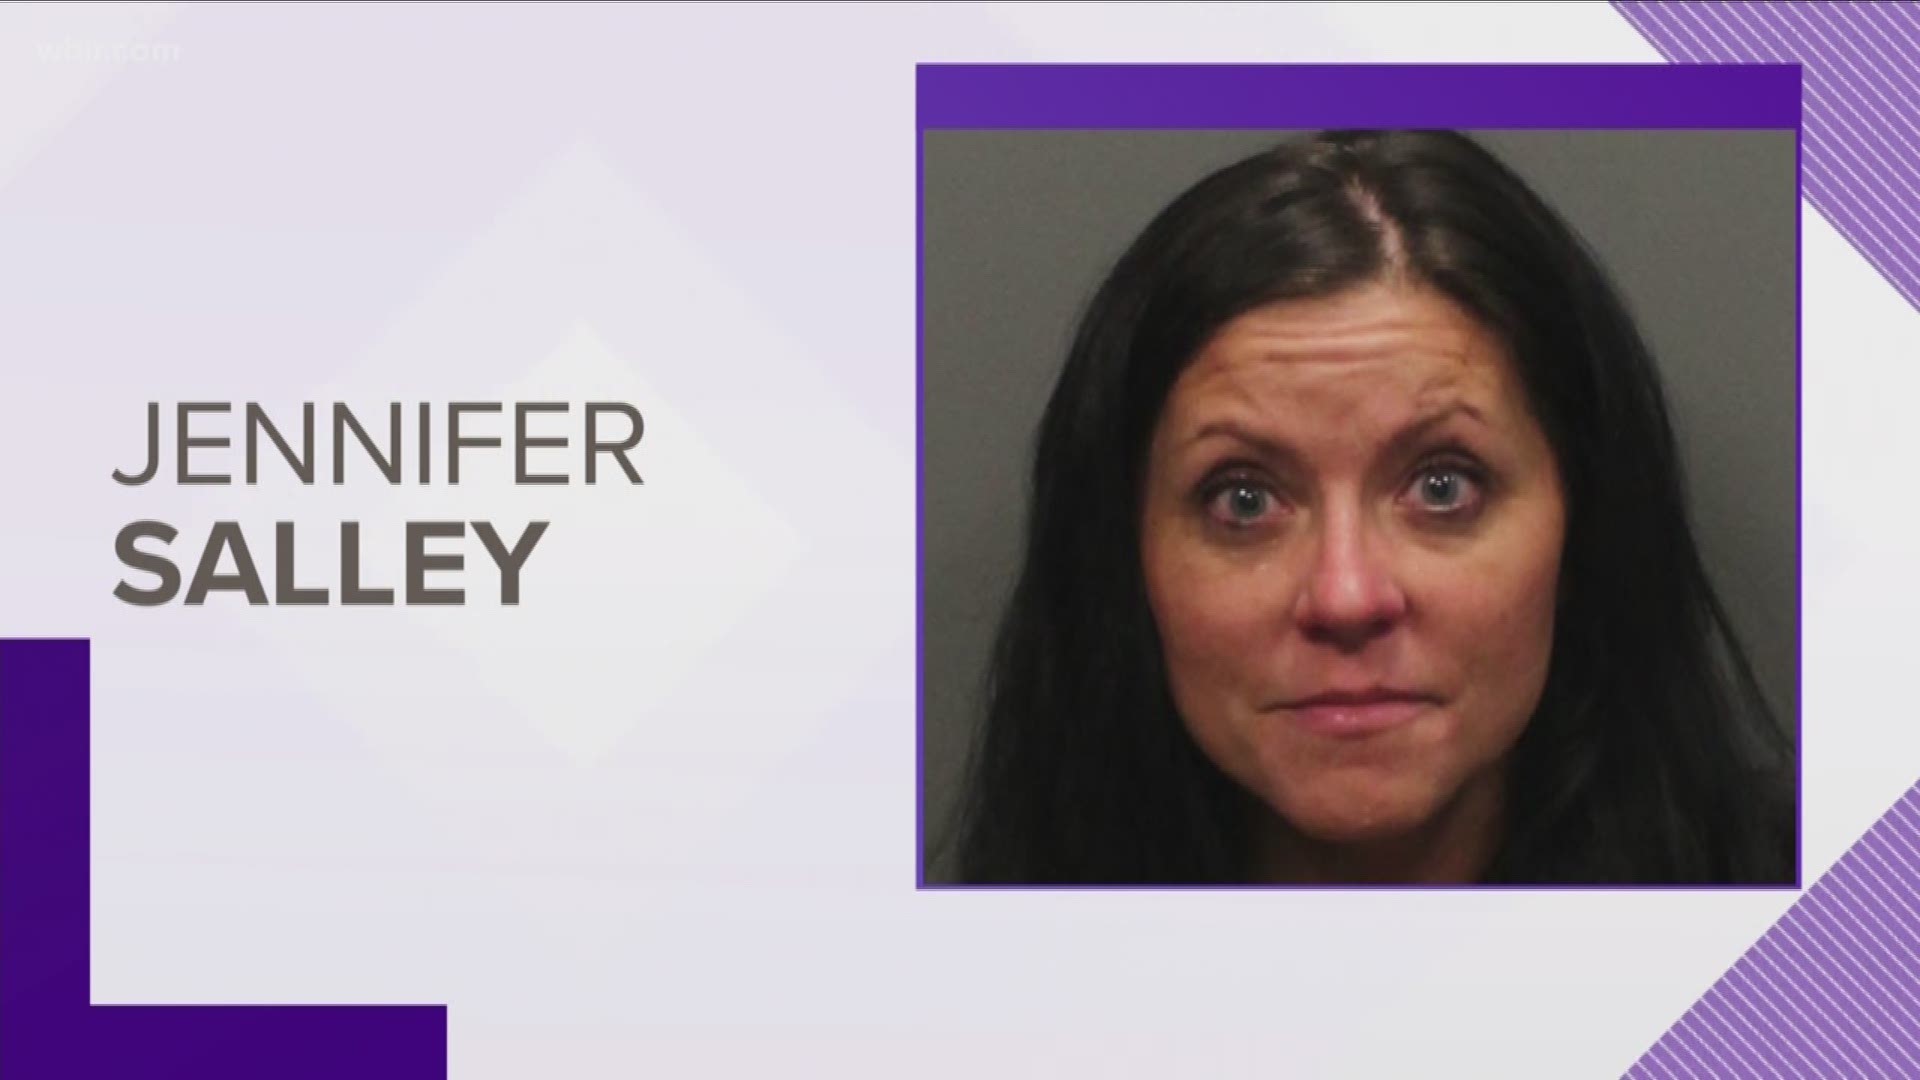 A babysitter now faces charges in the drowning deaths of twin toddlers last year. A grand jury indicted Jennifer Salley on two counts of criminally negligent homicide.